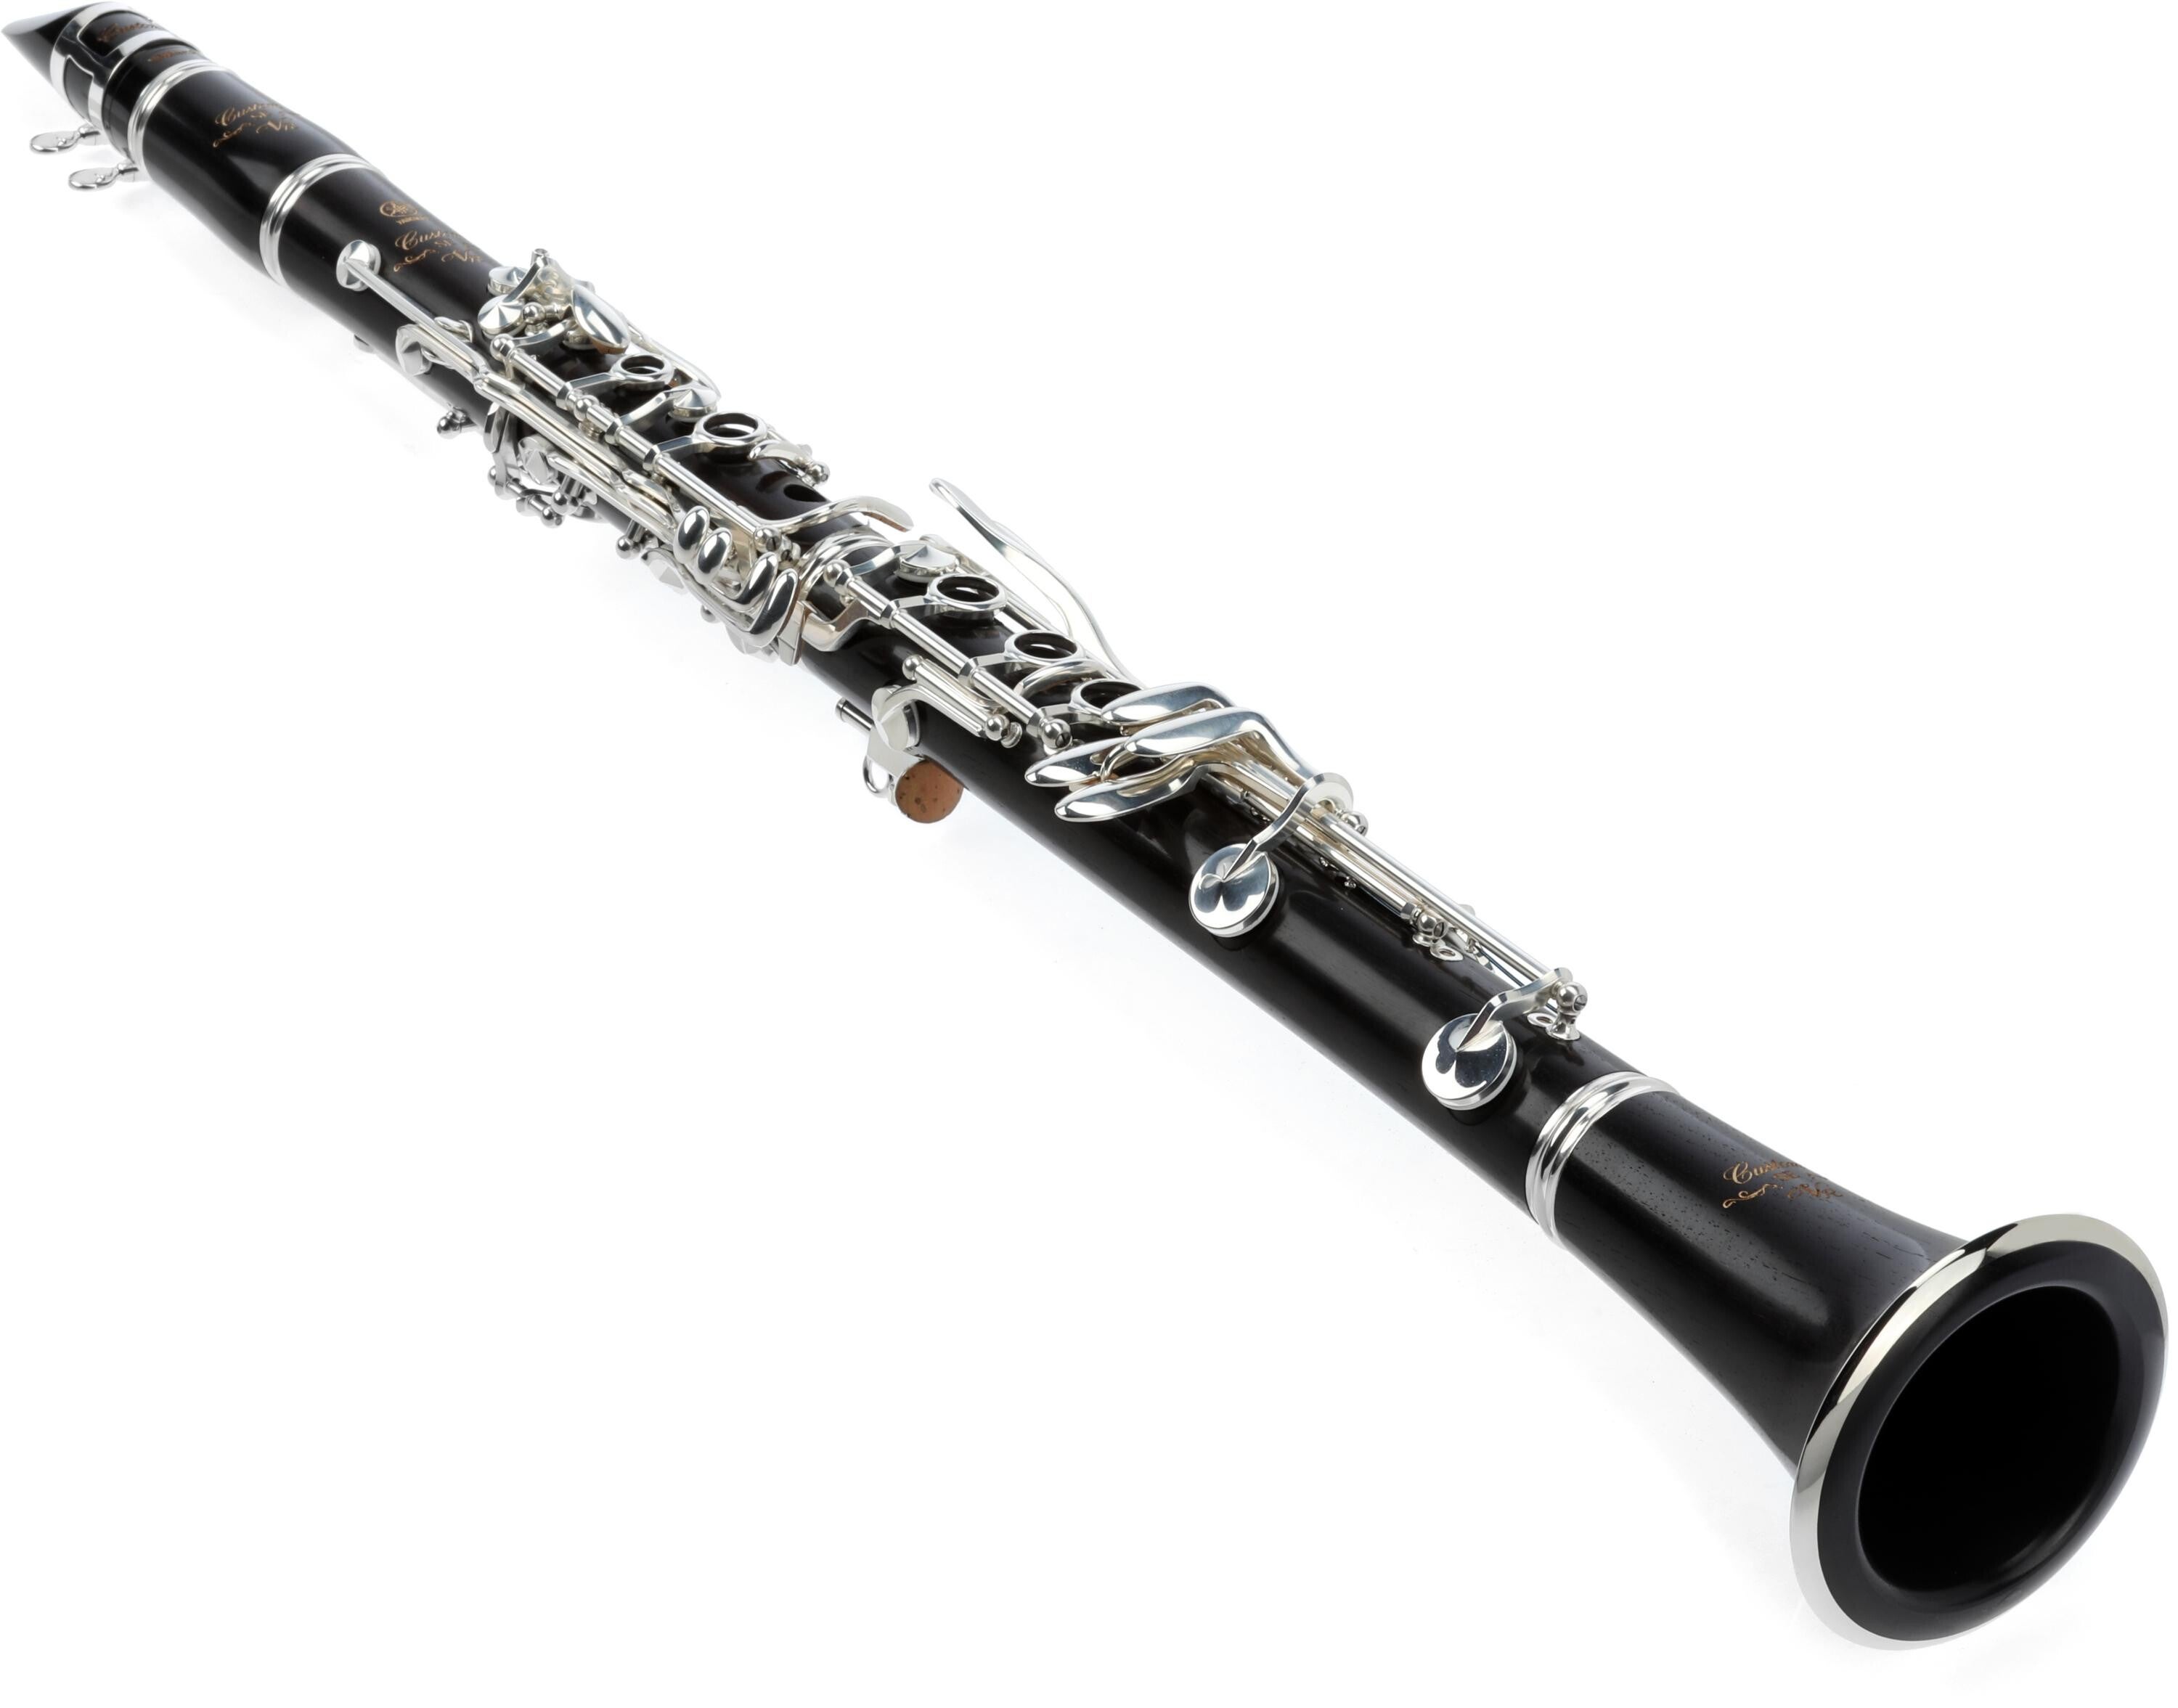 YCL-SEVR Professional Bb Clarinet with Silver-plated Keys - Sweetwater